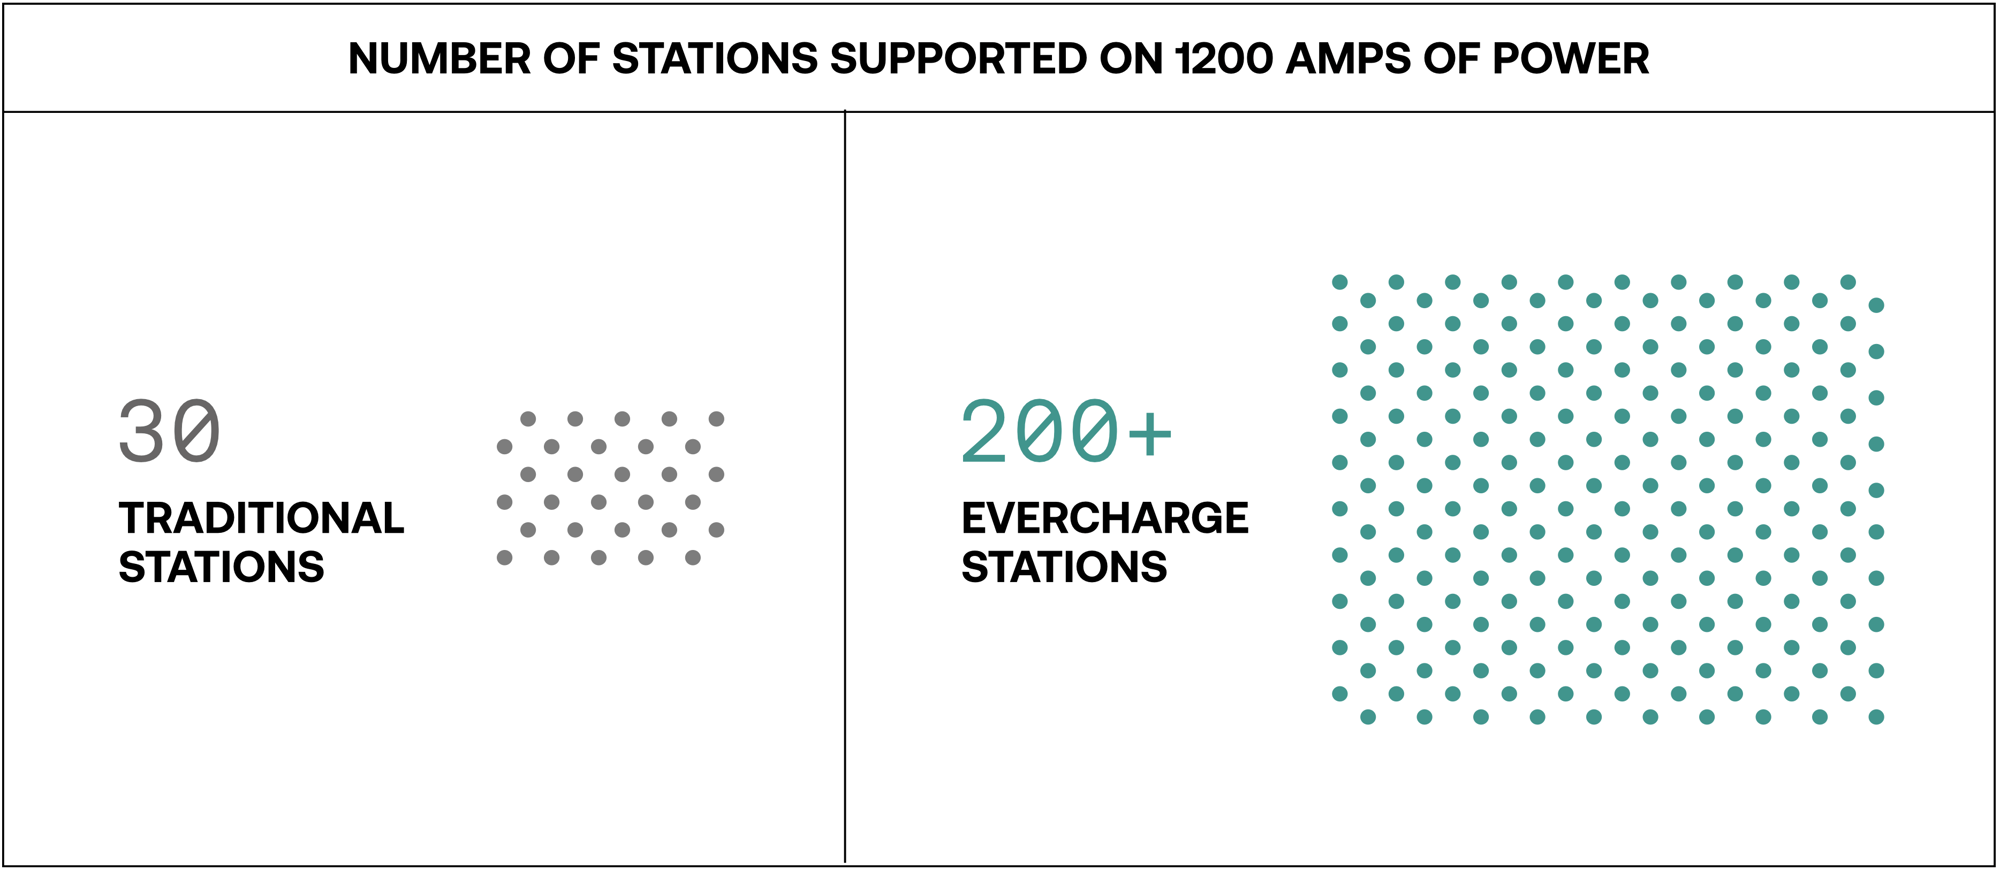 Number of stations supported on 1200 amps of power